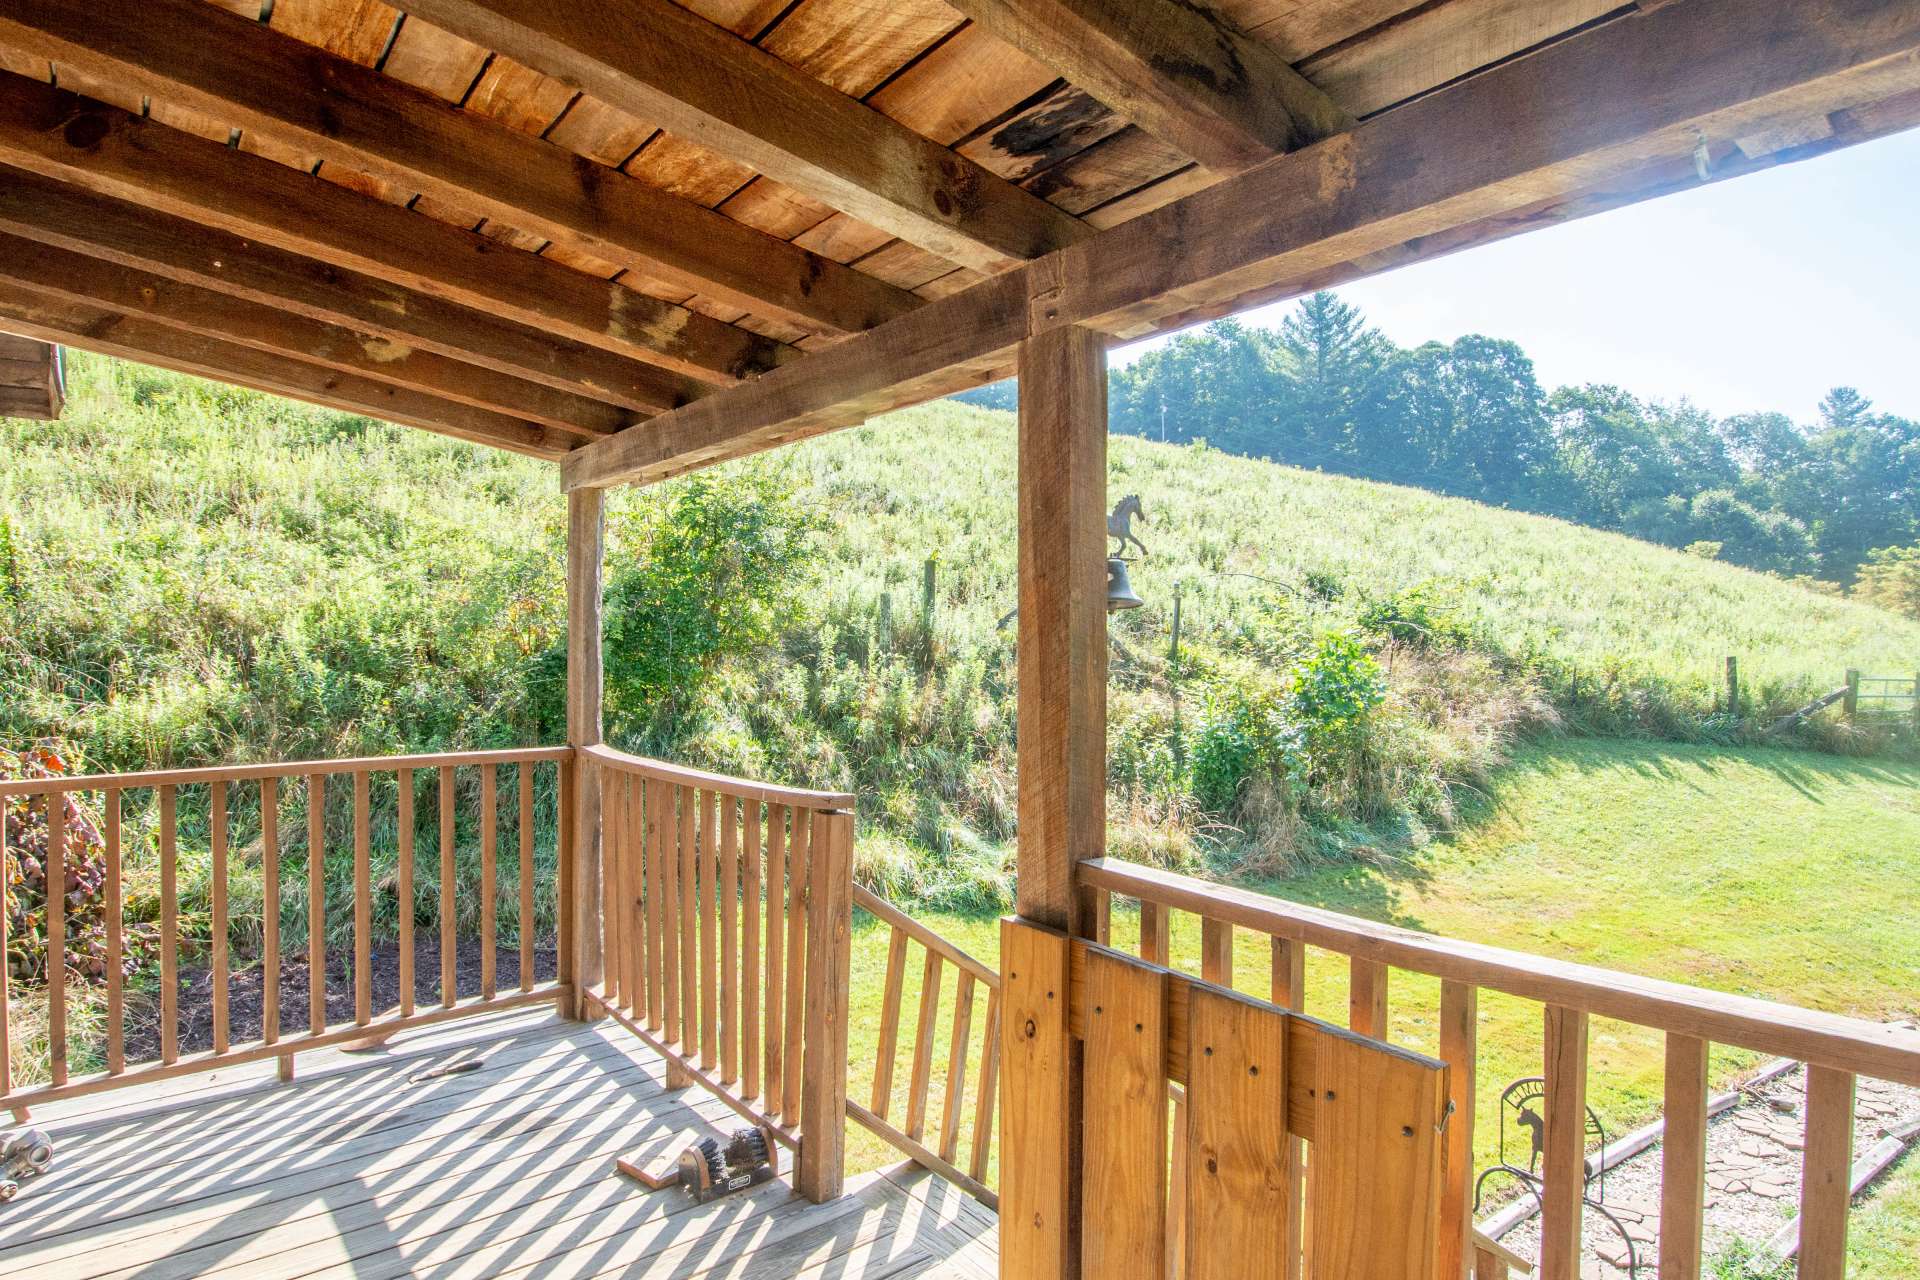 Enjoy the mountain countryside setting from the covered front porch.